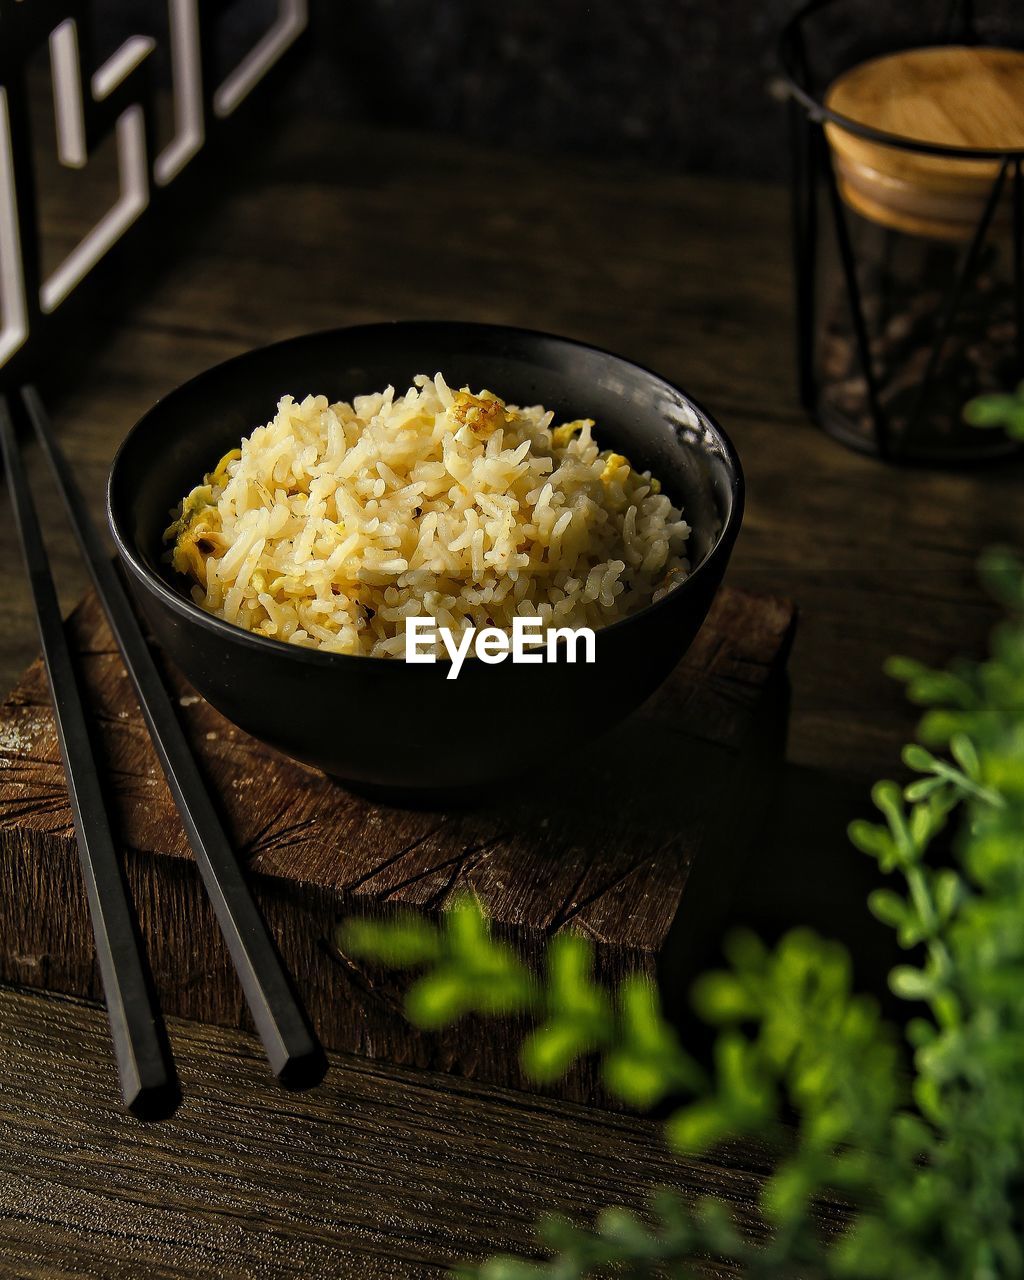 Fried rice photo with chinese concept